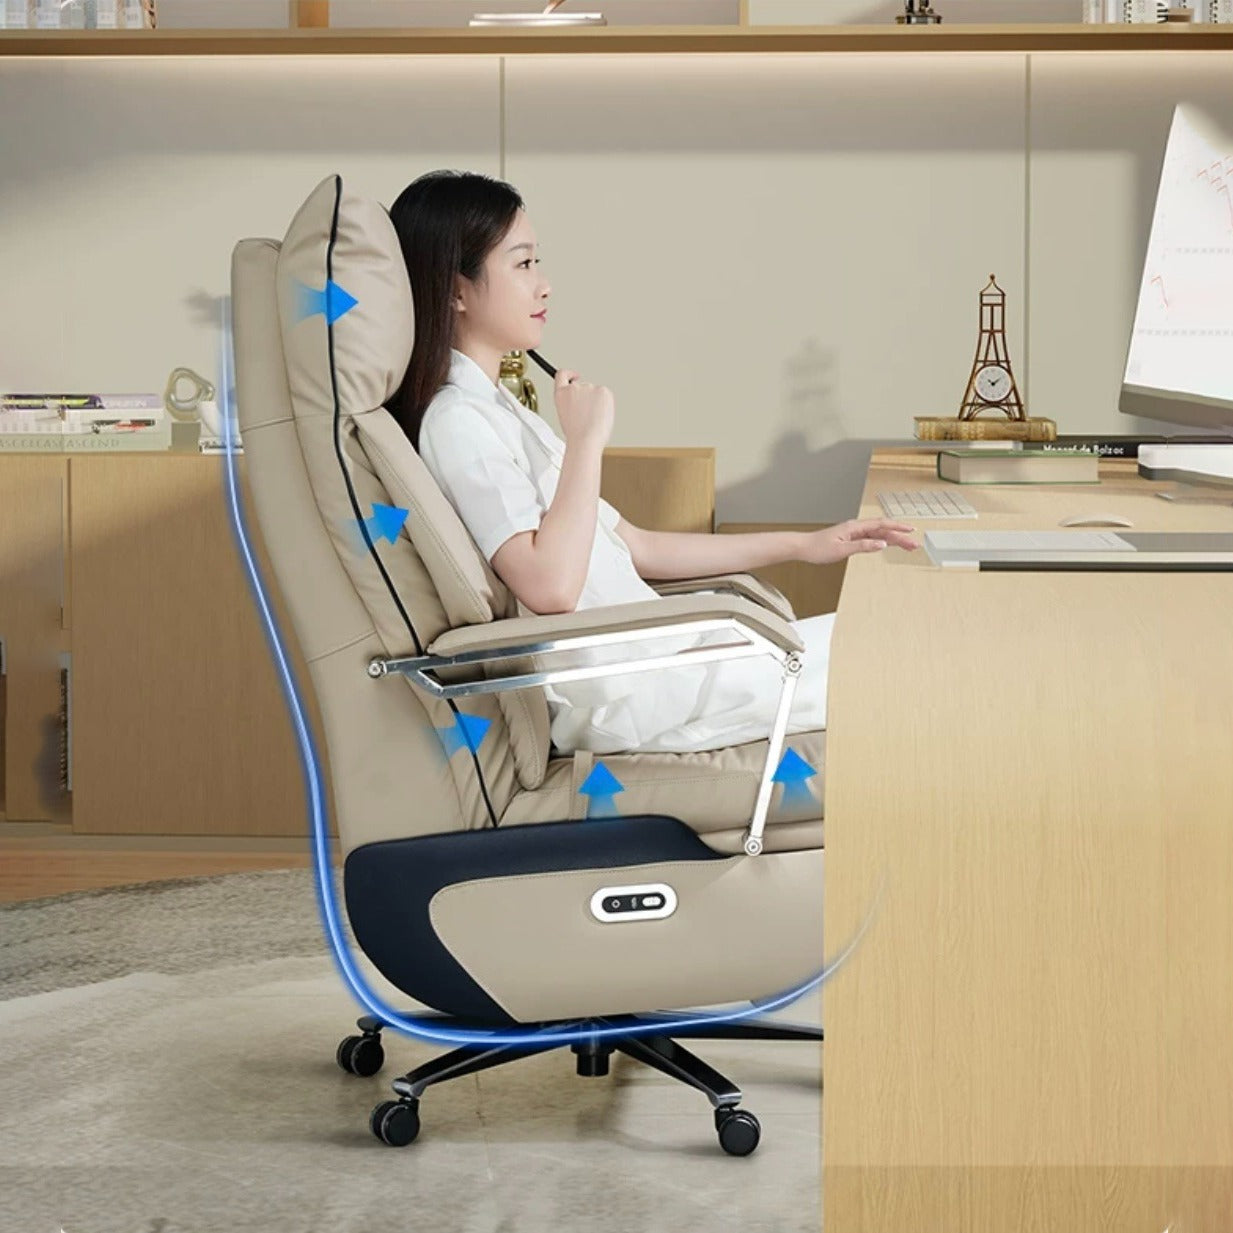 A person sitting on an Adjustable Electric Office Chair